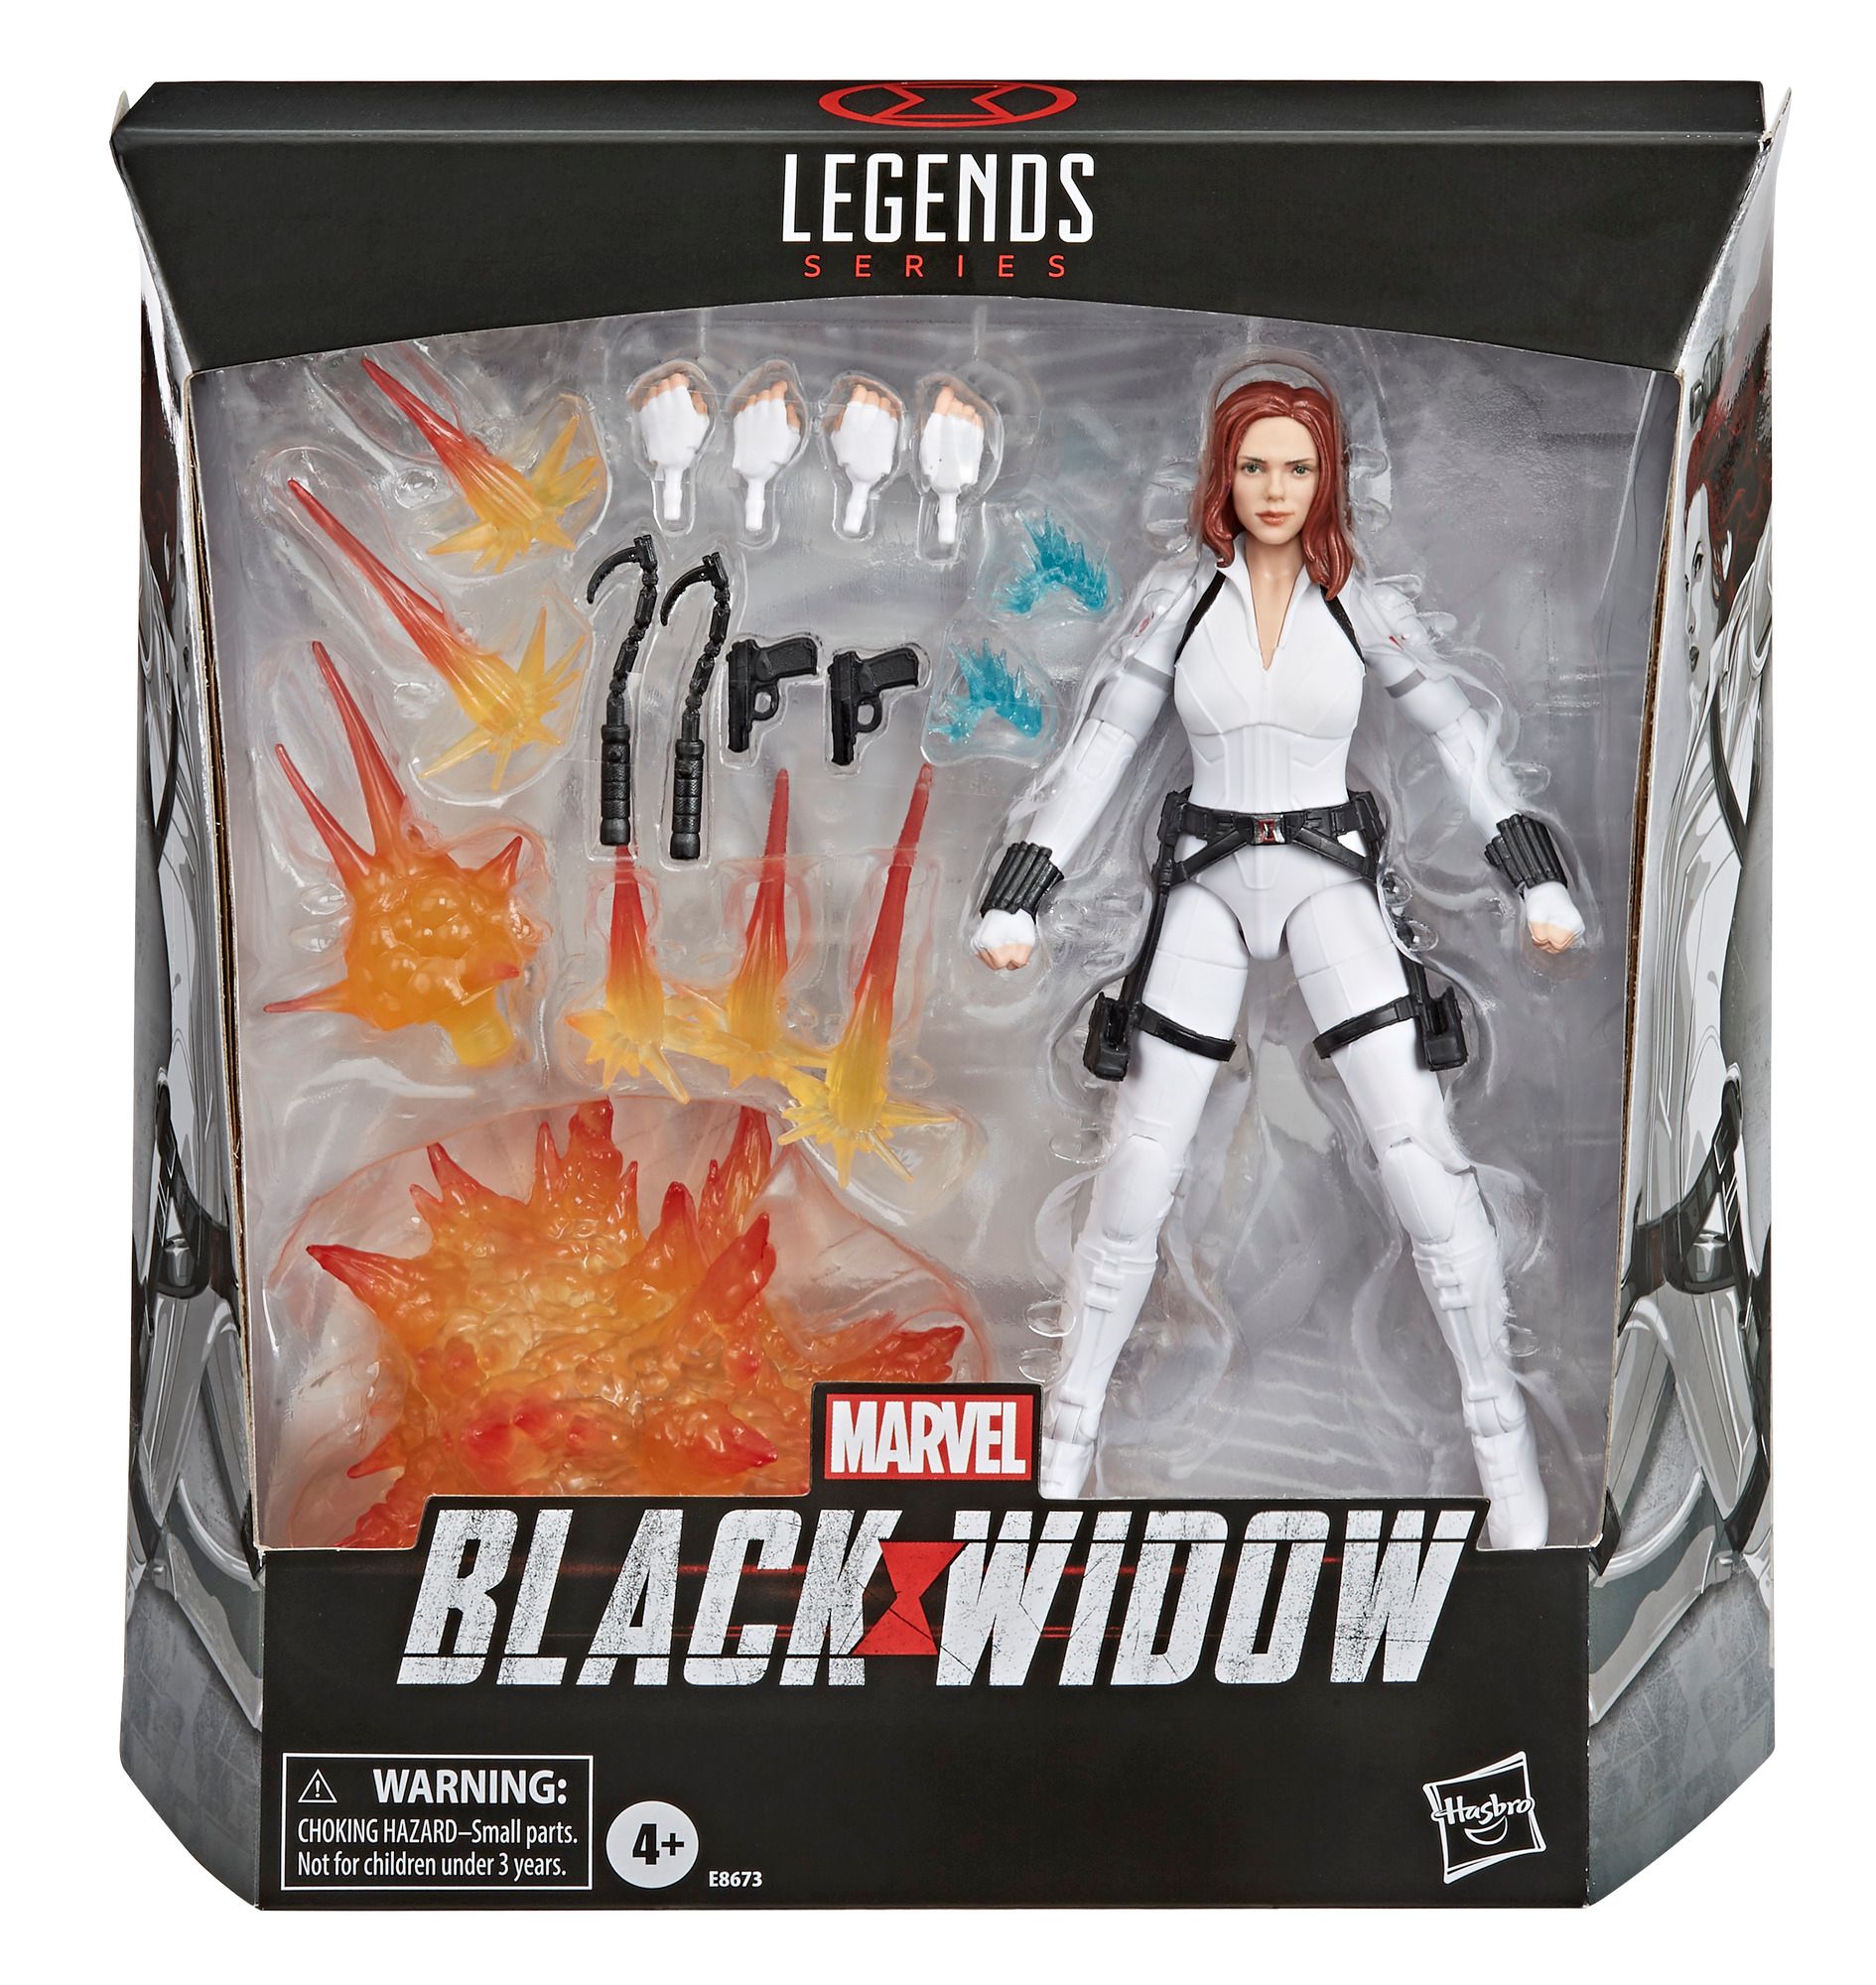 Black Widow Finally Has Her Own Toy Line; Movie Figures Revealed